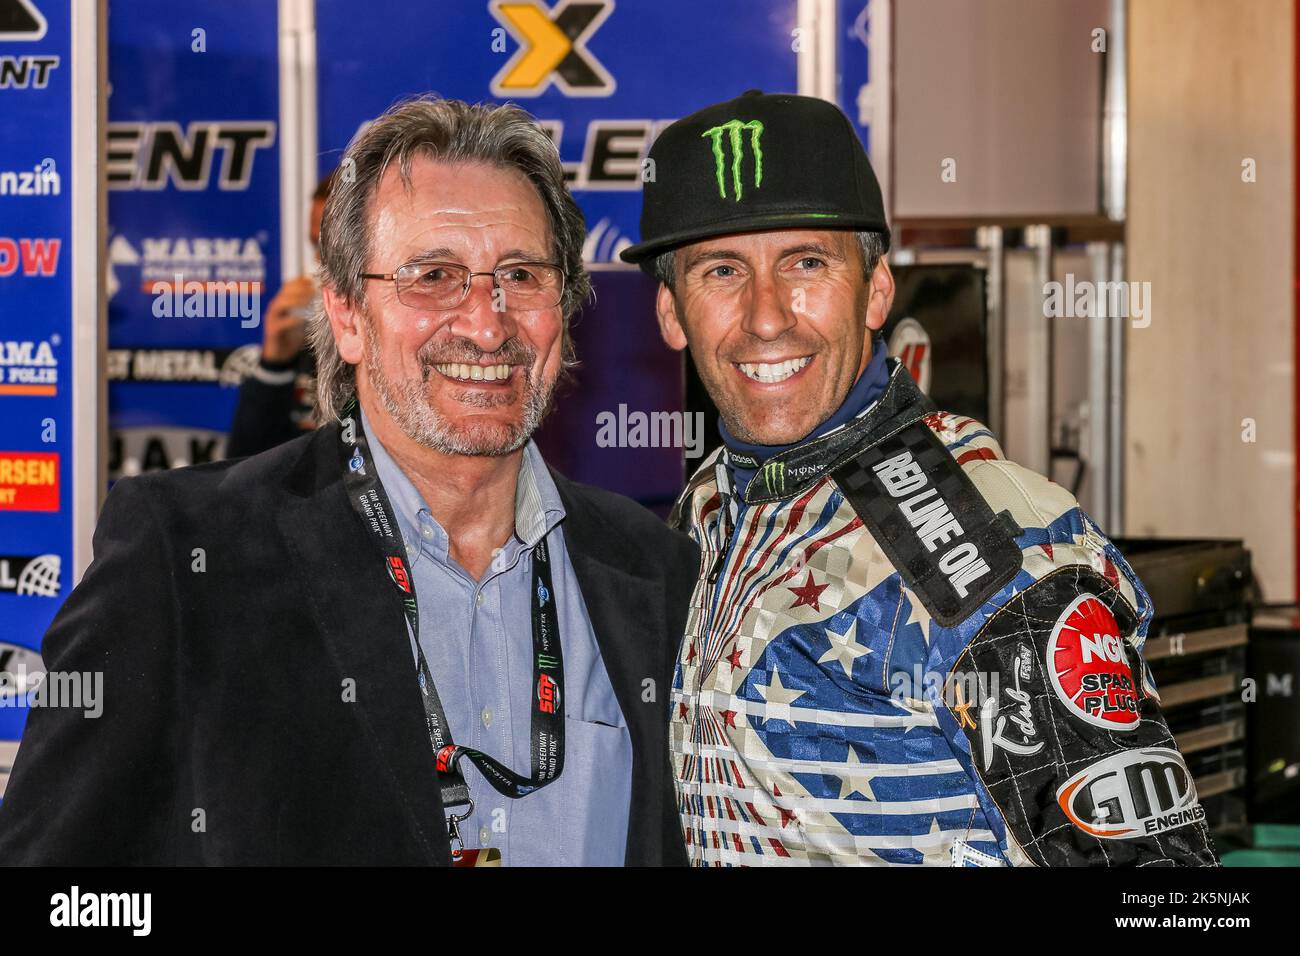 Speedway photographer Mike Patrick (left) with speedway world champion Greg Hancock as the 2013 British Speedway Grand Prix Stock Photo